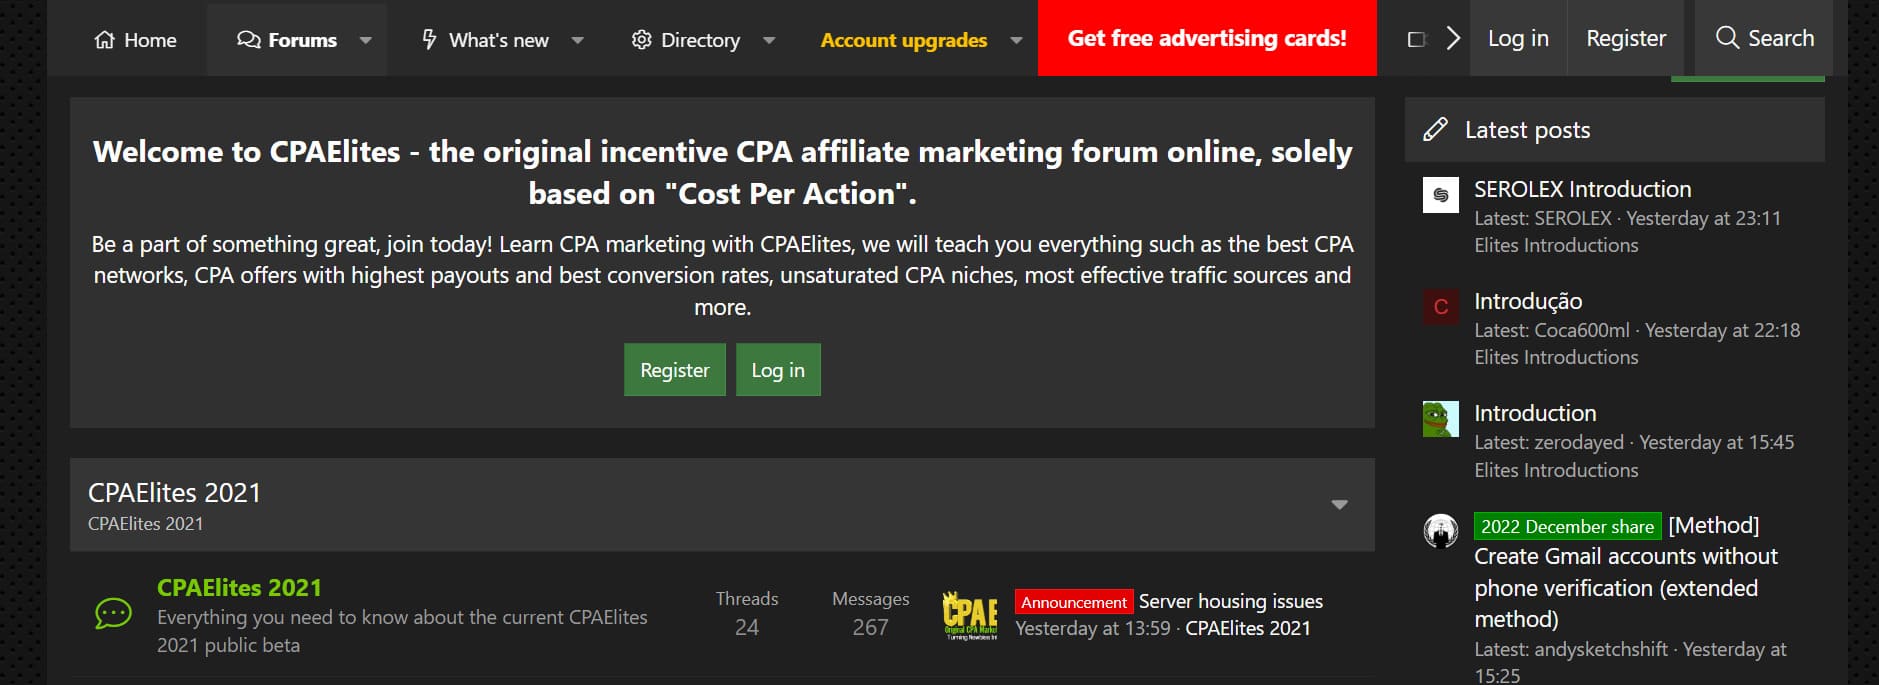 affiliate-marketing-forum-example-of-a-top-affiliate-marketing-forum-cpaelites